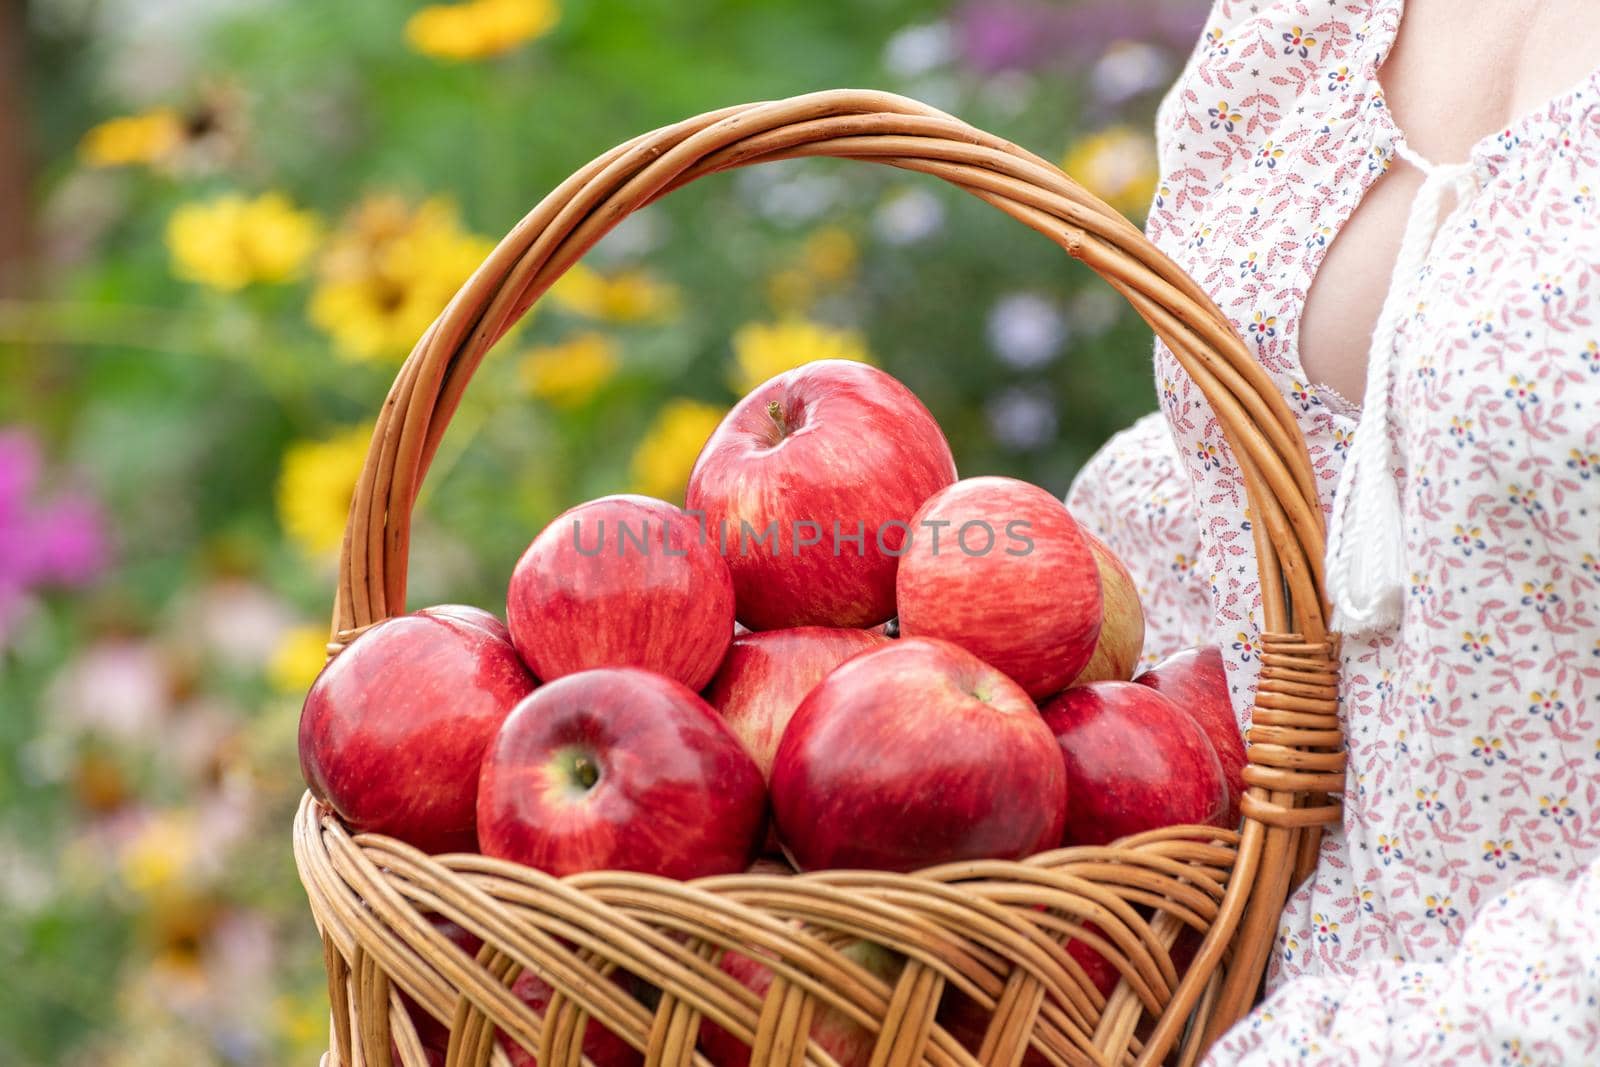 Woman holding a wicker basket with a red apples